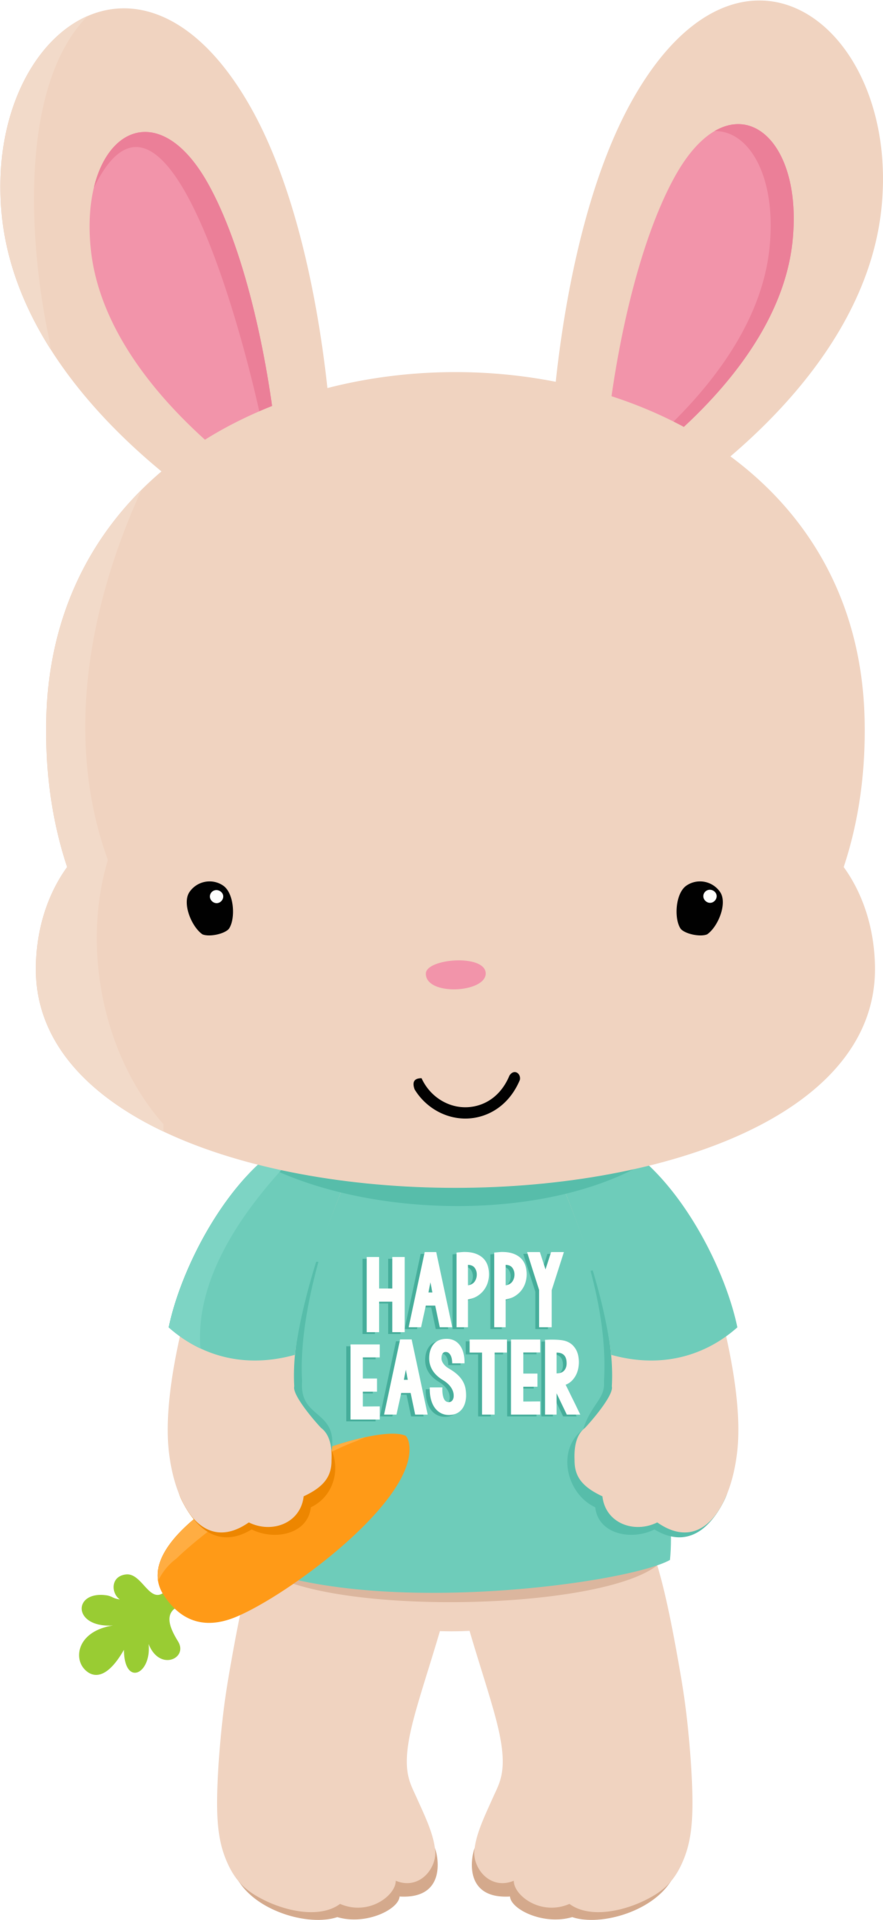 Happy Easter Bunny Cartoon Holding Carrot PNG image